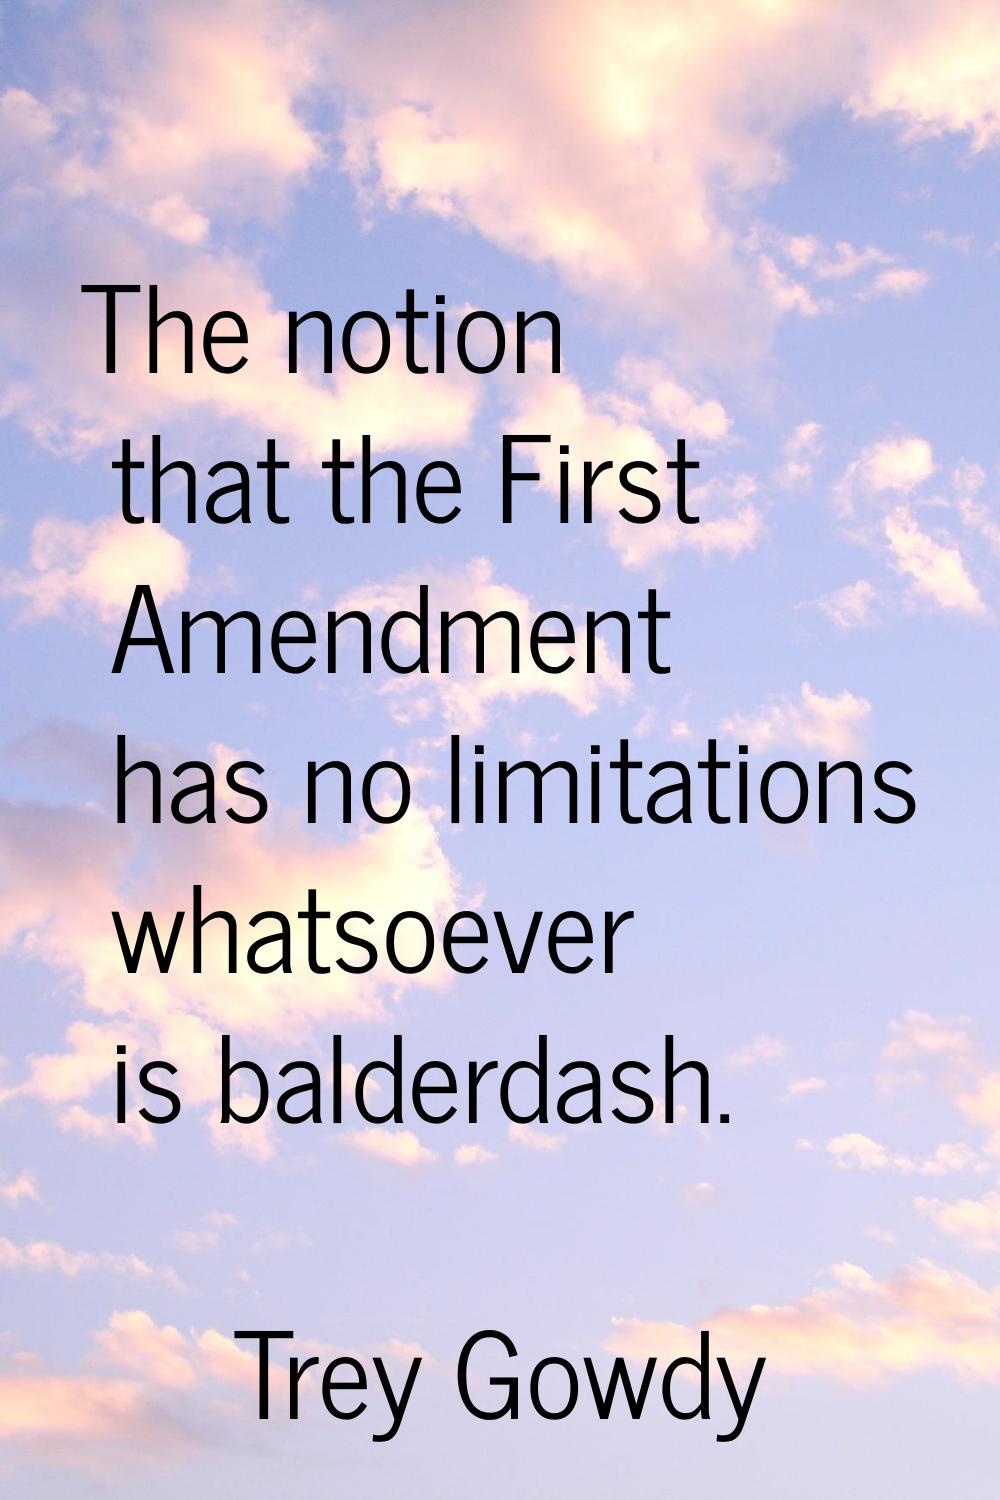 The notion that the First Amendment has no limitations whatsoever is balderdash.